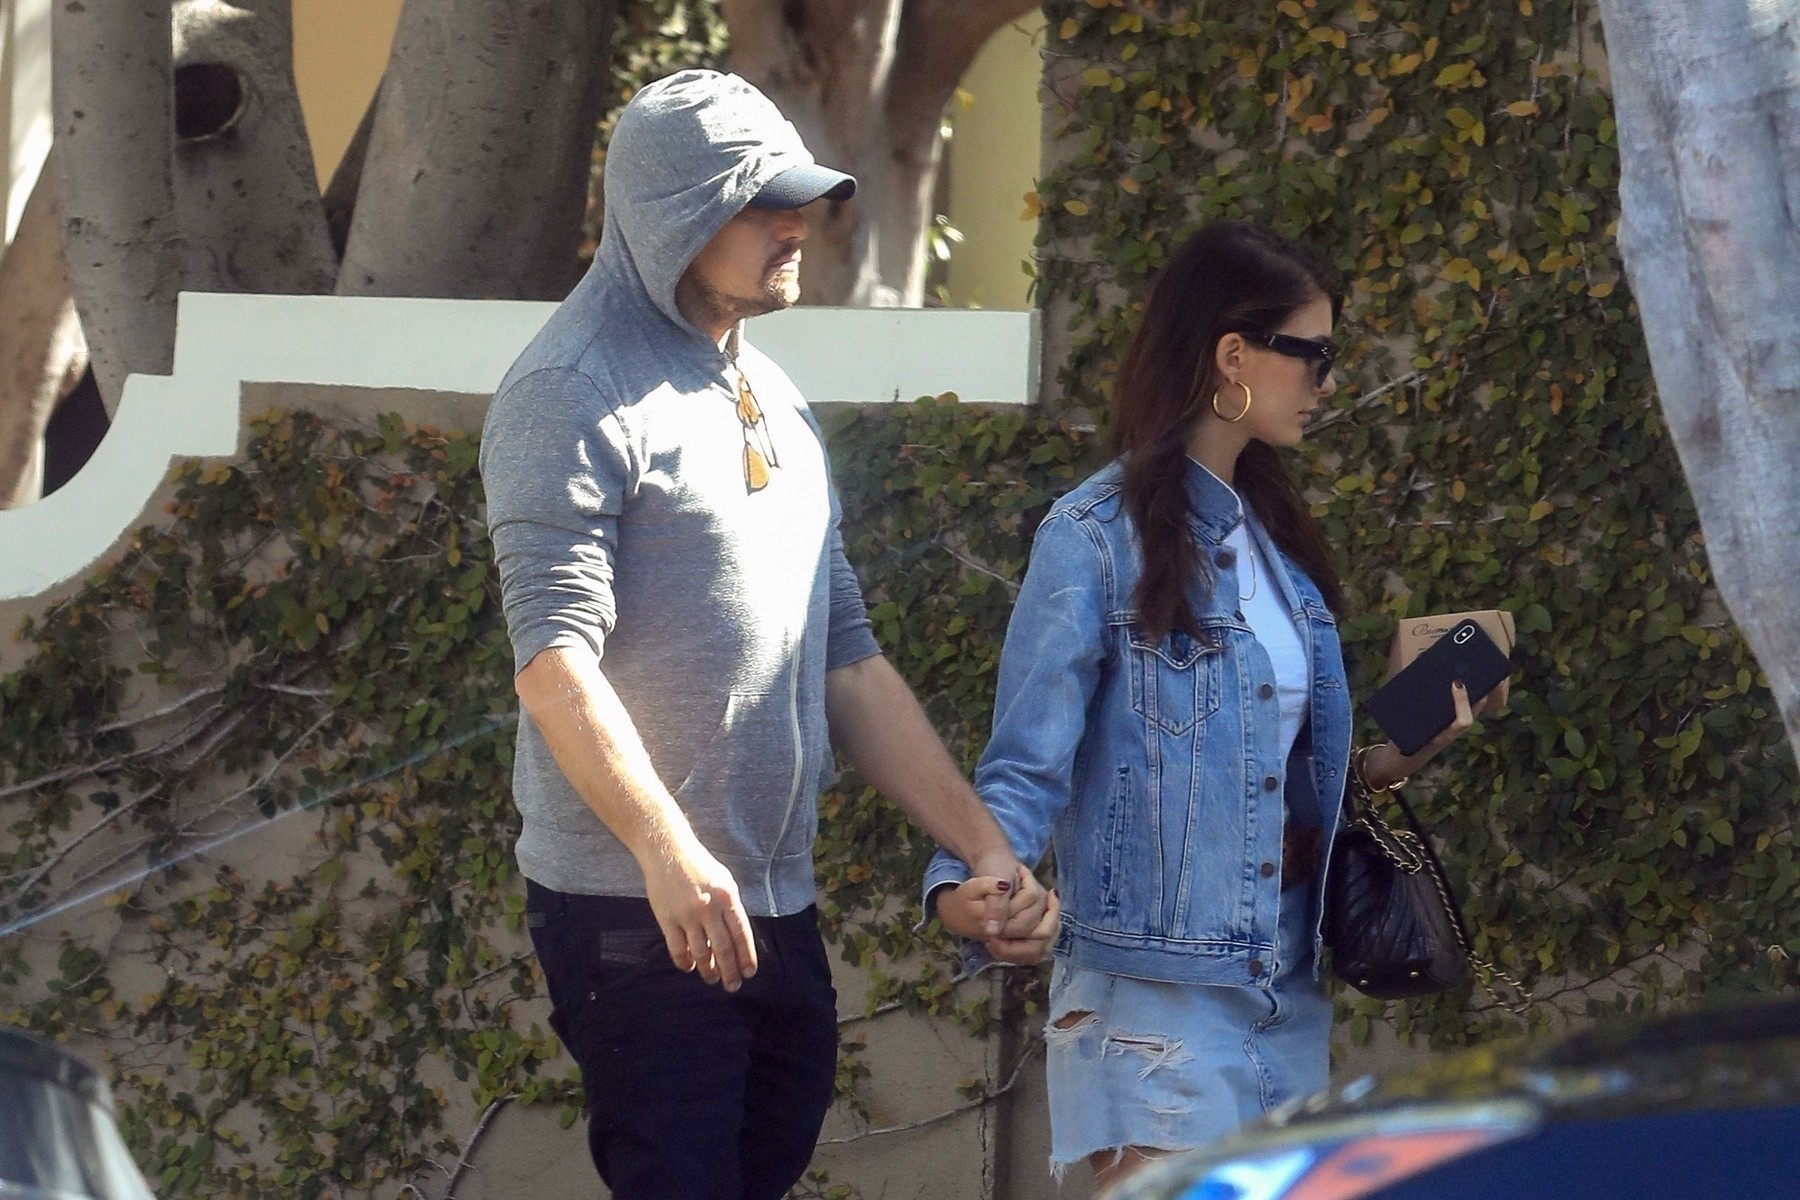 *EXCLUSIVE* West Hollywood, CA  - Leonardo DiCaprio attempts to go incognito as he and girlfriend Camila Morrone go shopping on Melrose Place in West Hollywood together. Leo wears his usual baseball cap and hoody as he hides his famous face while out on the town with his Argentine model and actress girlfriend.

Pictured: Leonardo DiCaprio, Camila Morrone



*UK Clients - Pictures Containing Children
Please Pixelate Face Prior To Publication*, Image: 417981653, License: Rights-managed, Restrictions: , Model Release: no, Credit line: BKGD / GAMR / BACKGRID / Backgrid USA / Profimedia